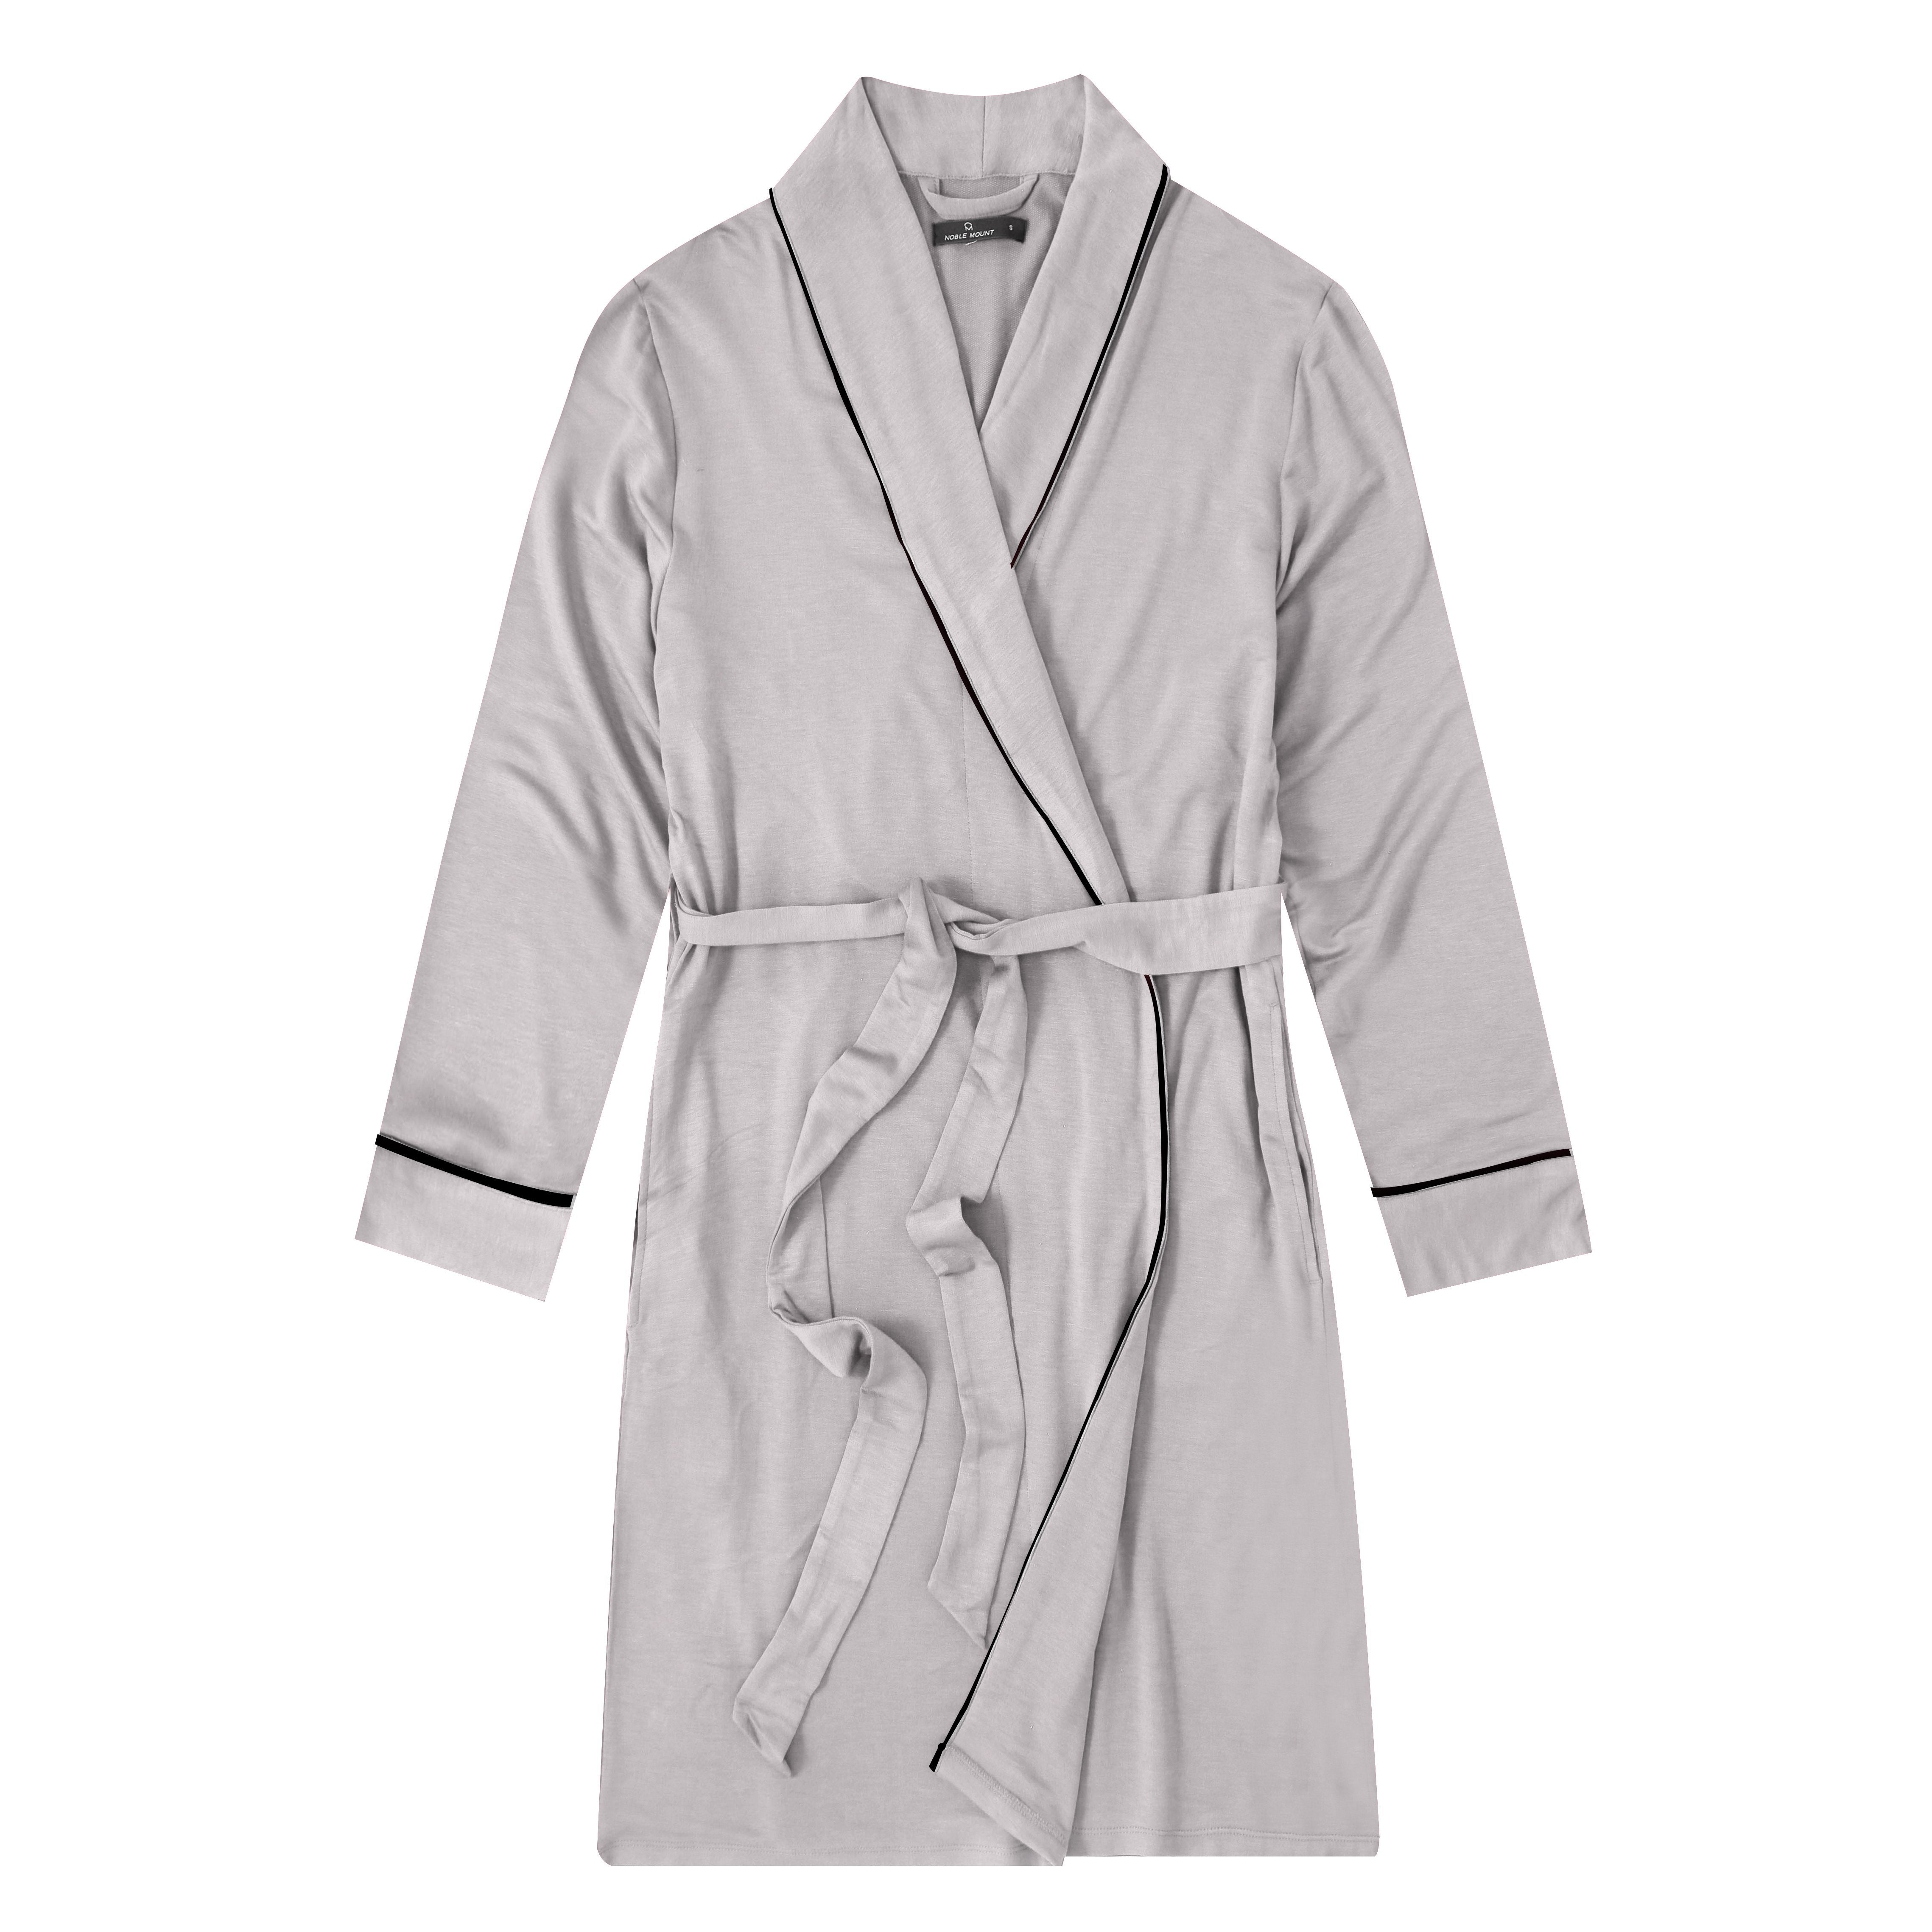 Women's Jersey Knit French Terry Short Robe